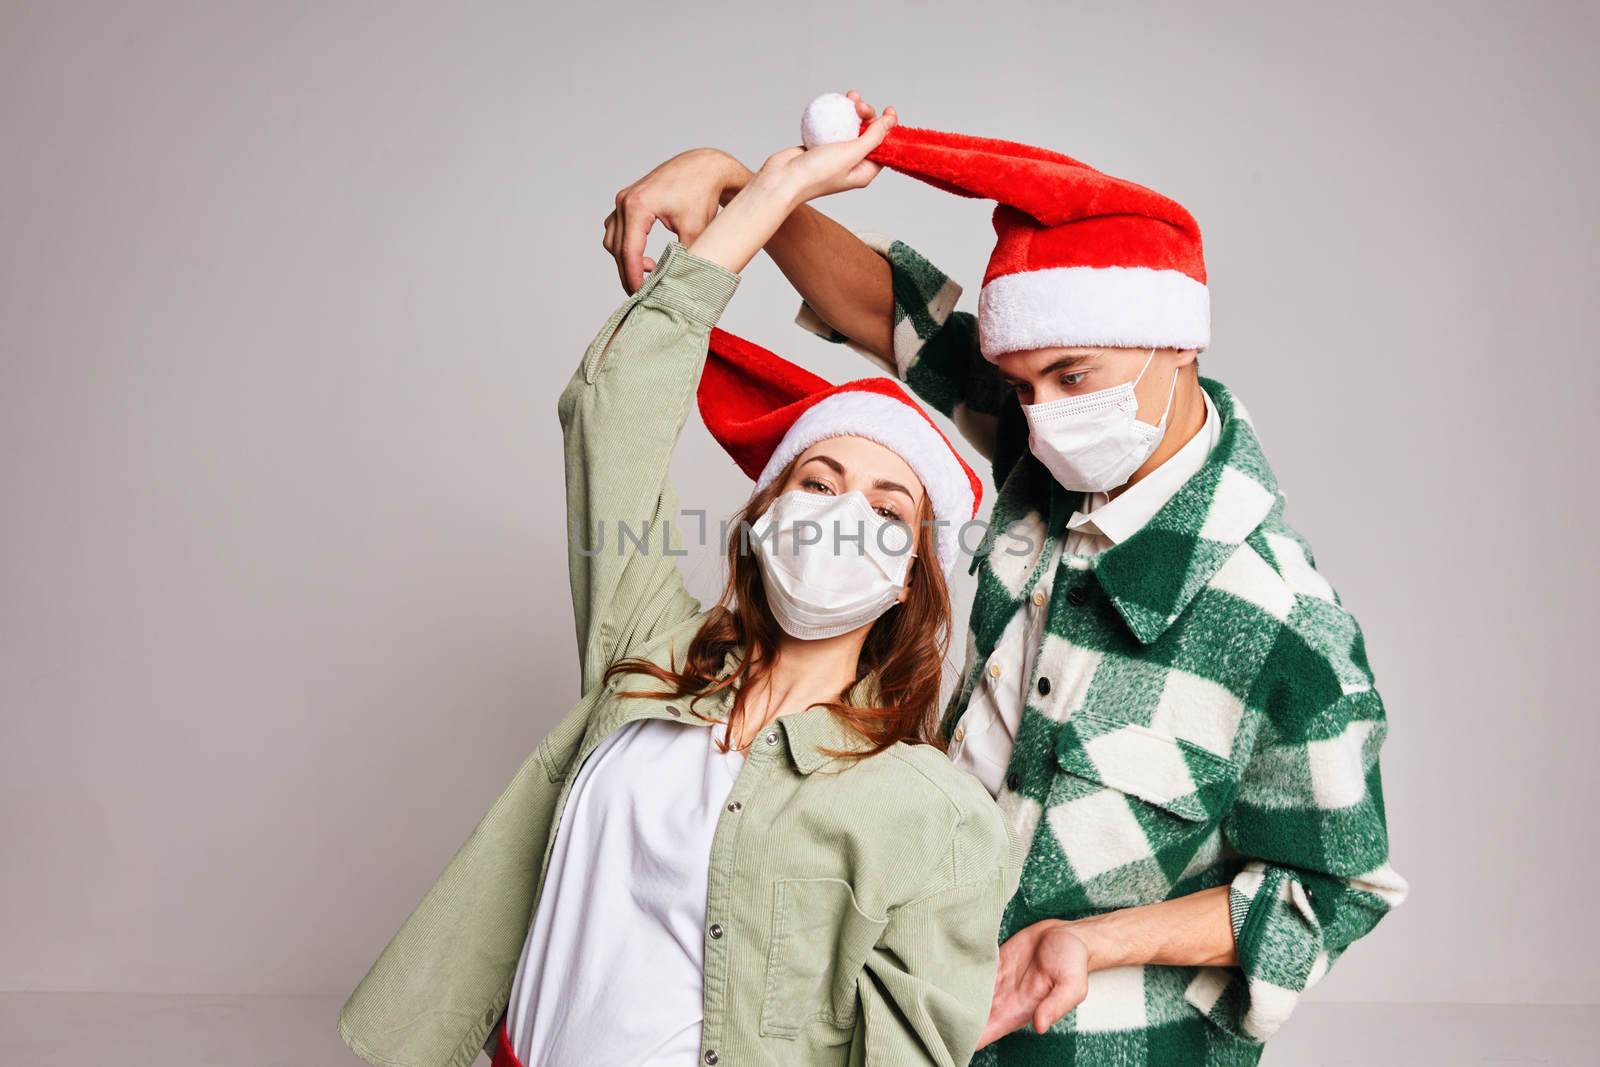 Man and woman having fun together in medical masks holiday Christmas gray background. High quality photo